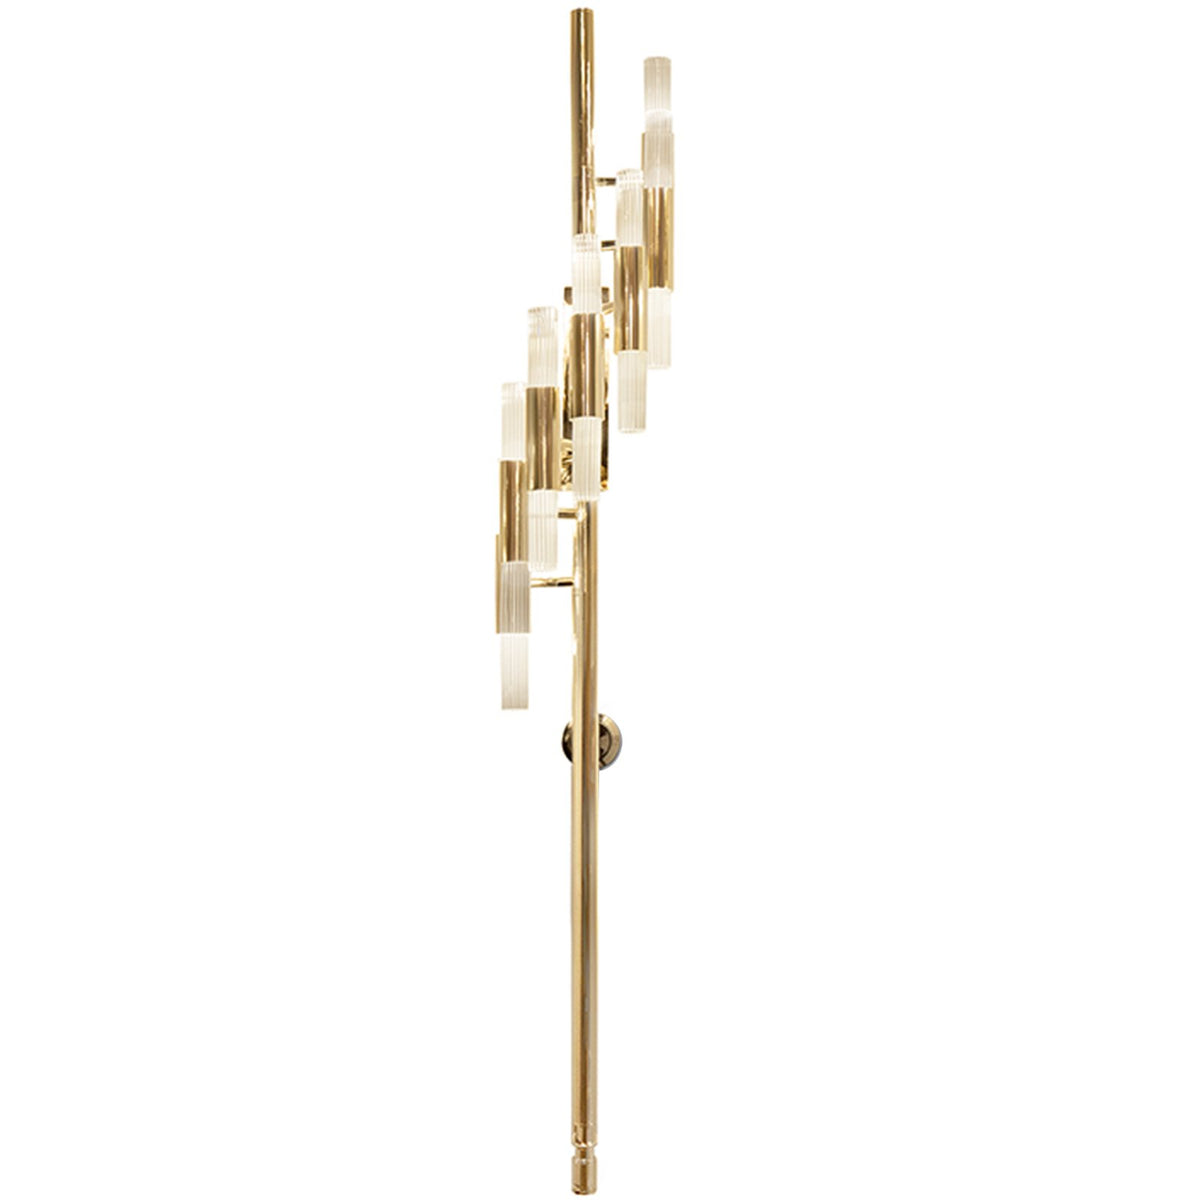 Waterfall Torch Wall Sconce